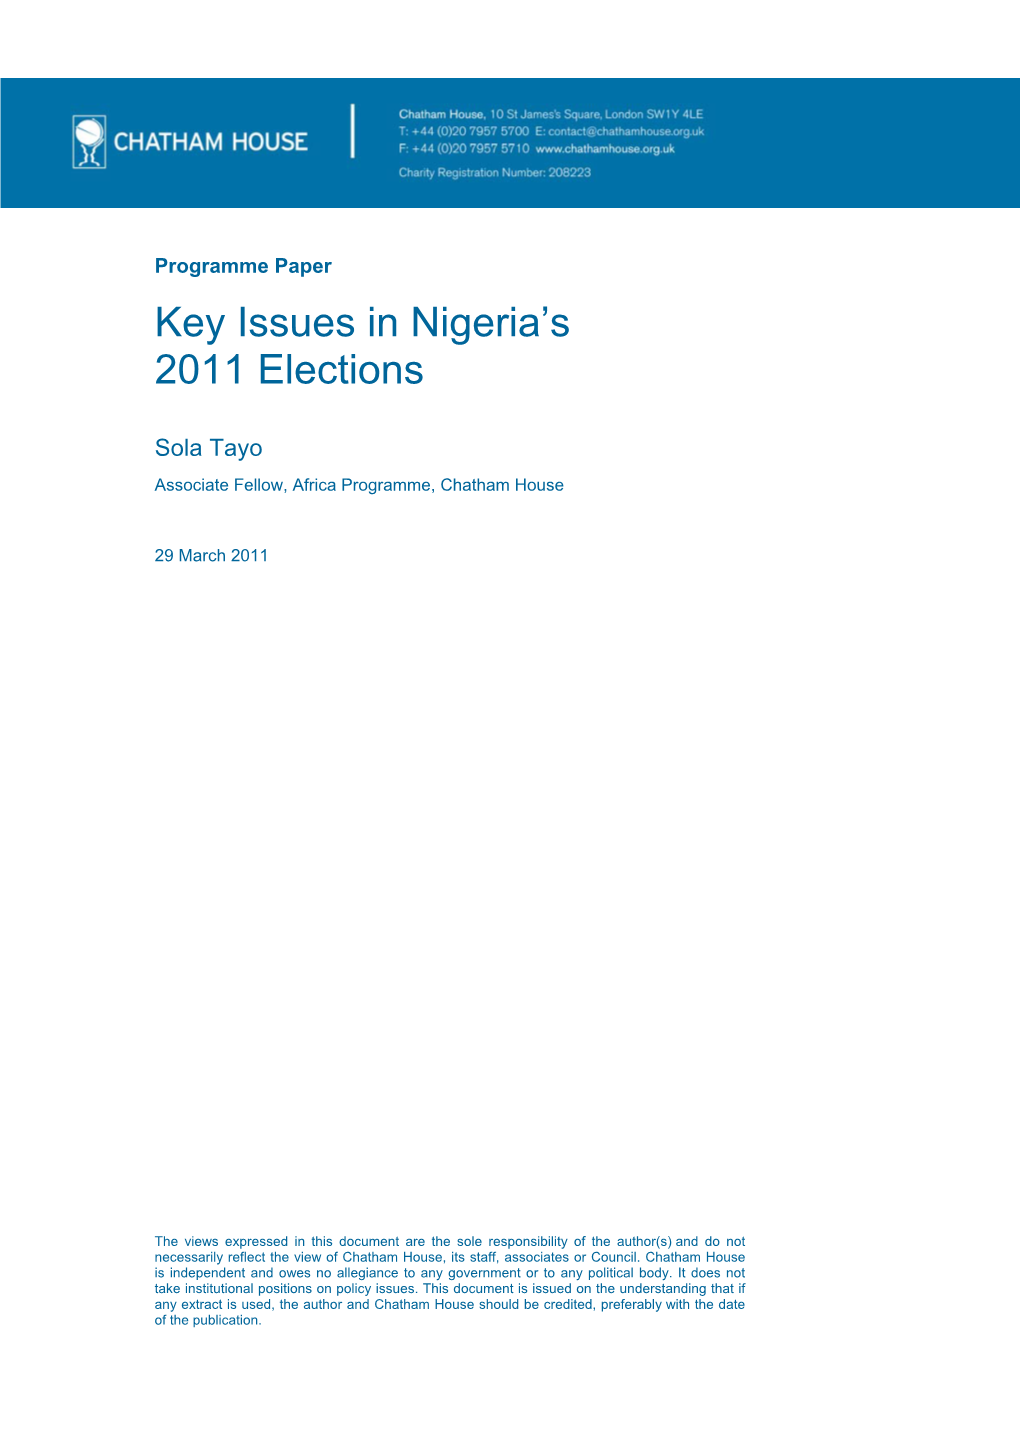 Key Issues in Nigeria's 2011 Elections